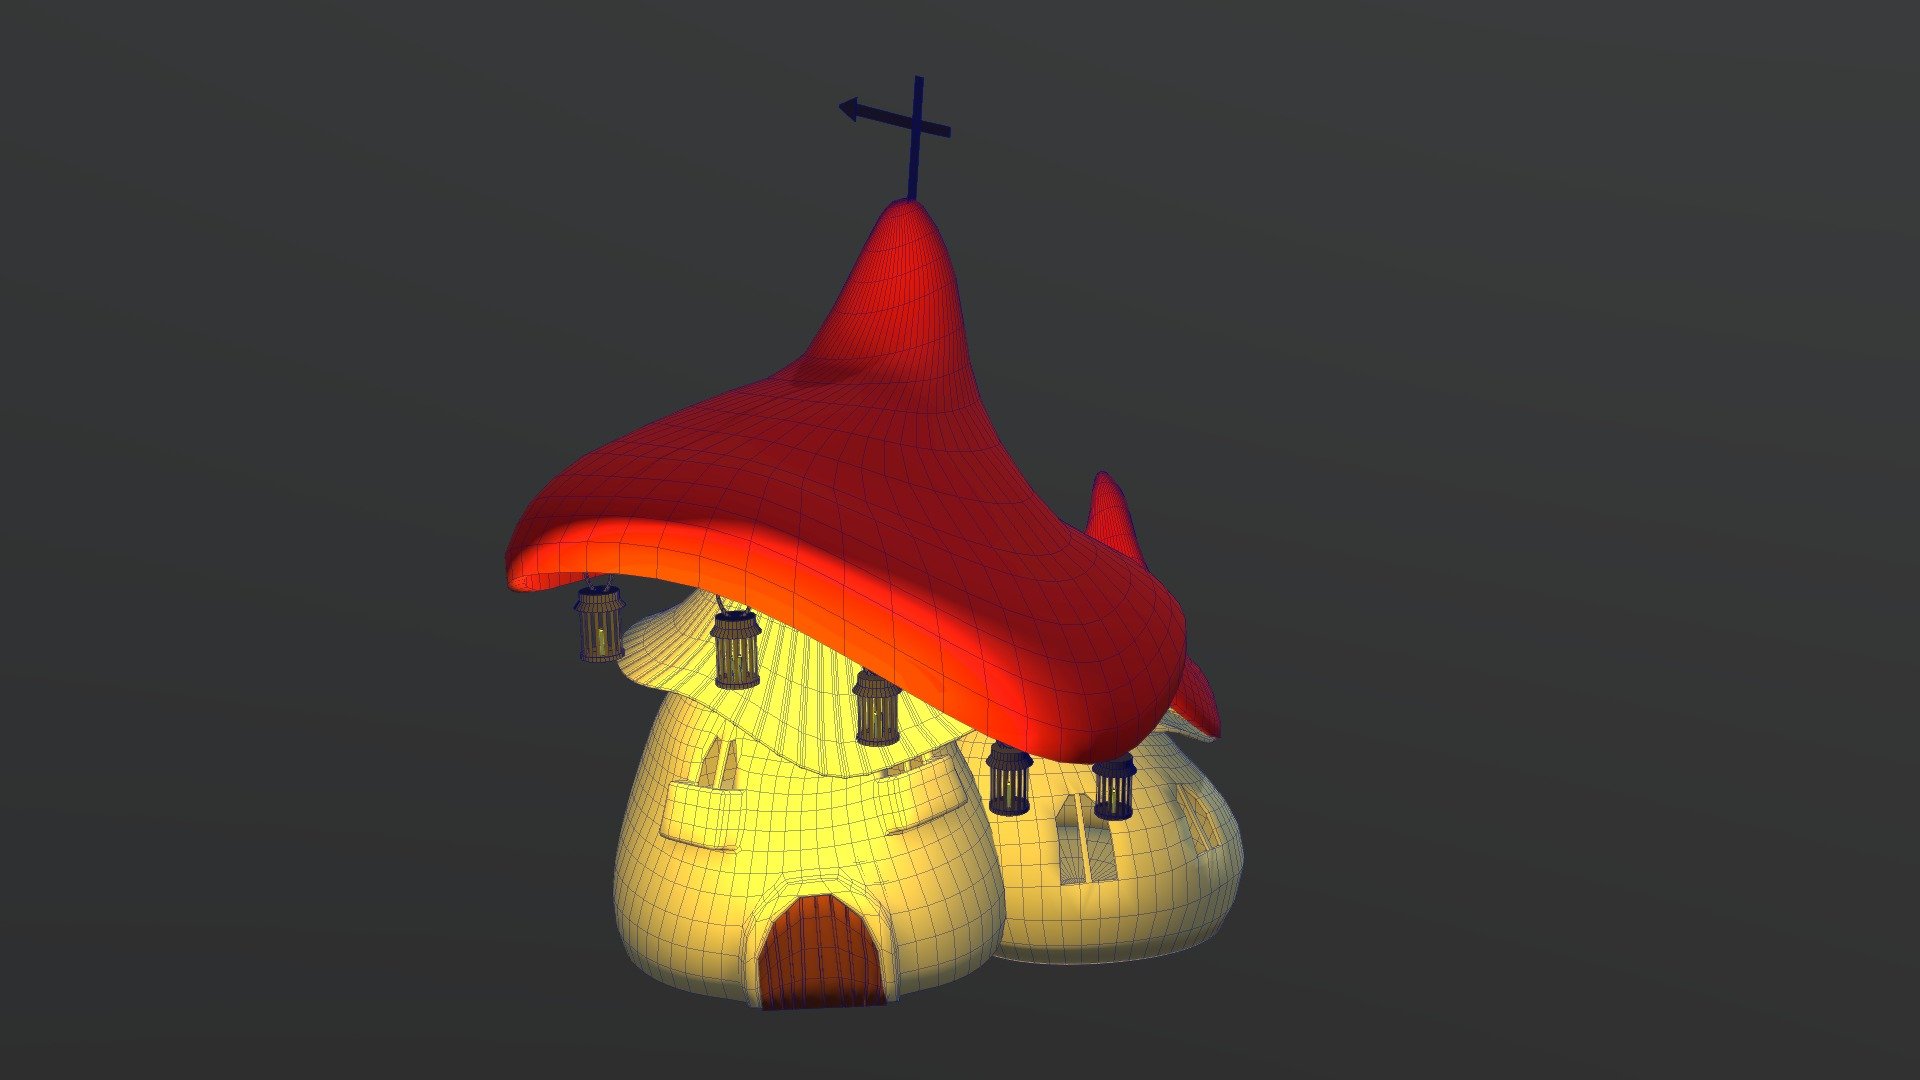 Hello everyone.
This model was created for overpainting. This is a mushroom-shaped fairy's house.
You can see my artworks on the artstation or support on Ko-fi.

Artstation: https://mornaista.artstation.com/
Ko-fi https://ko-fi.com/mornaista - Fairy's dream house - Download Free 3D model by mornaista 3d model